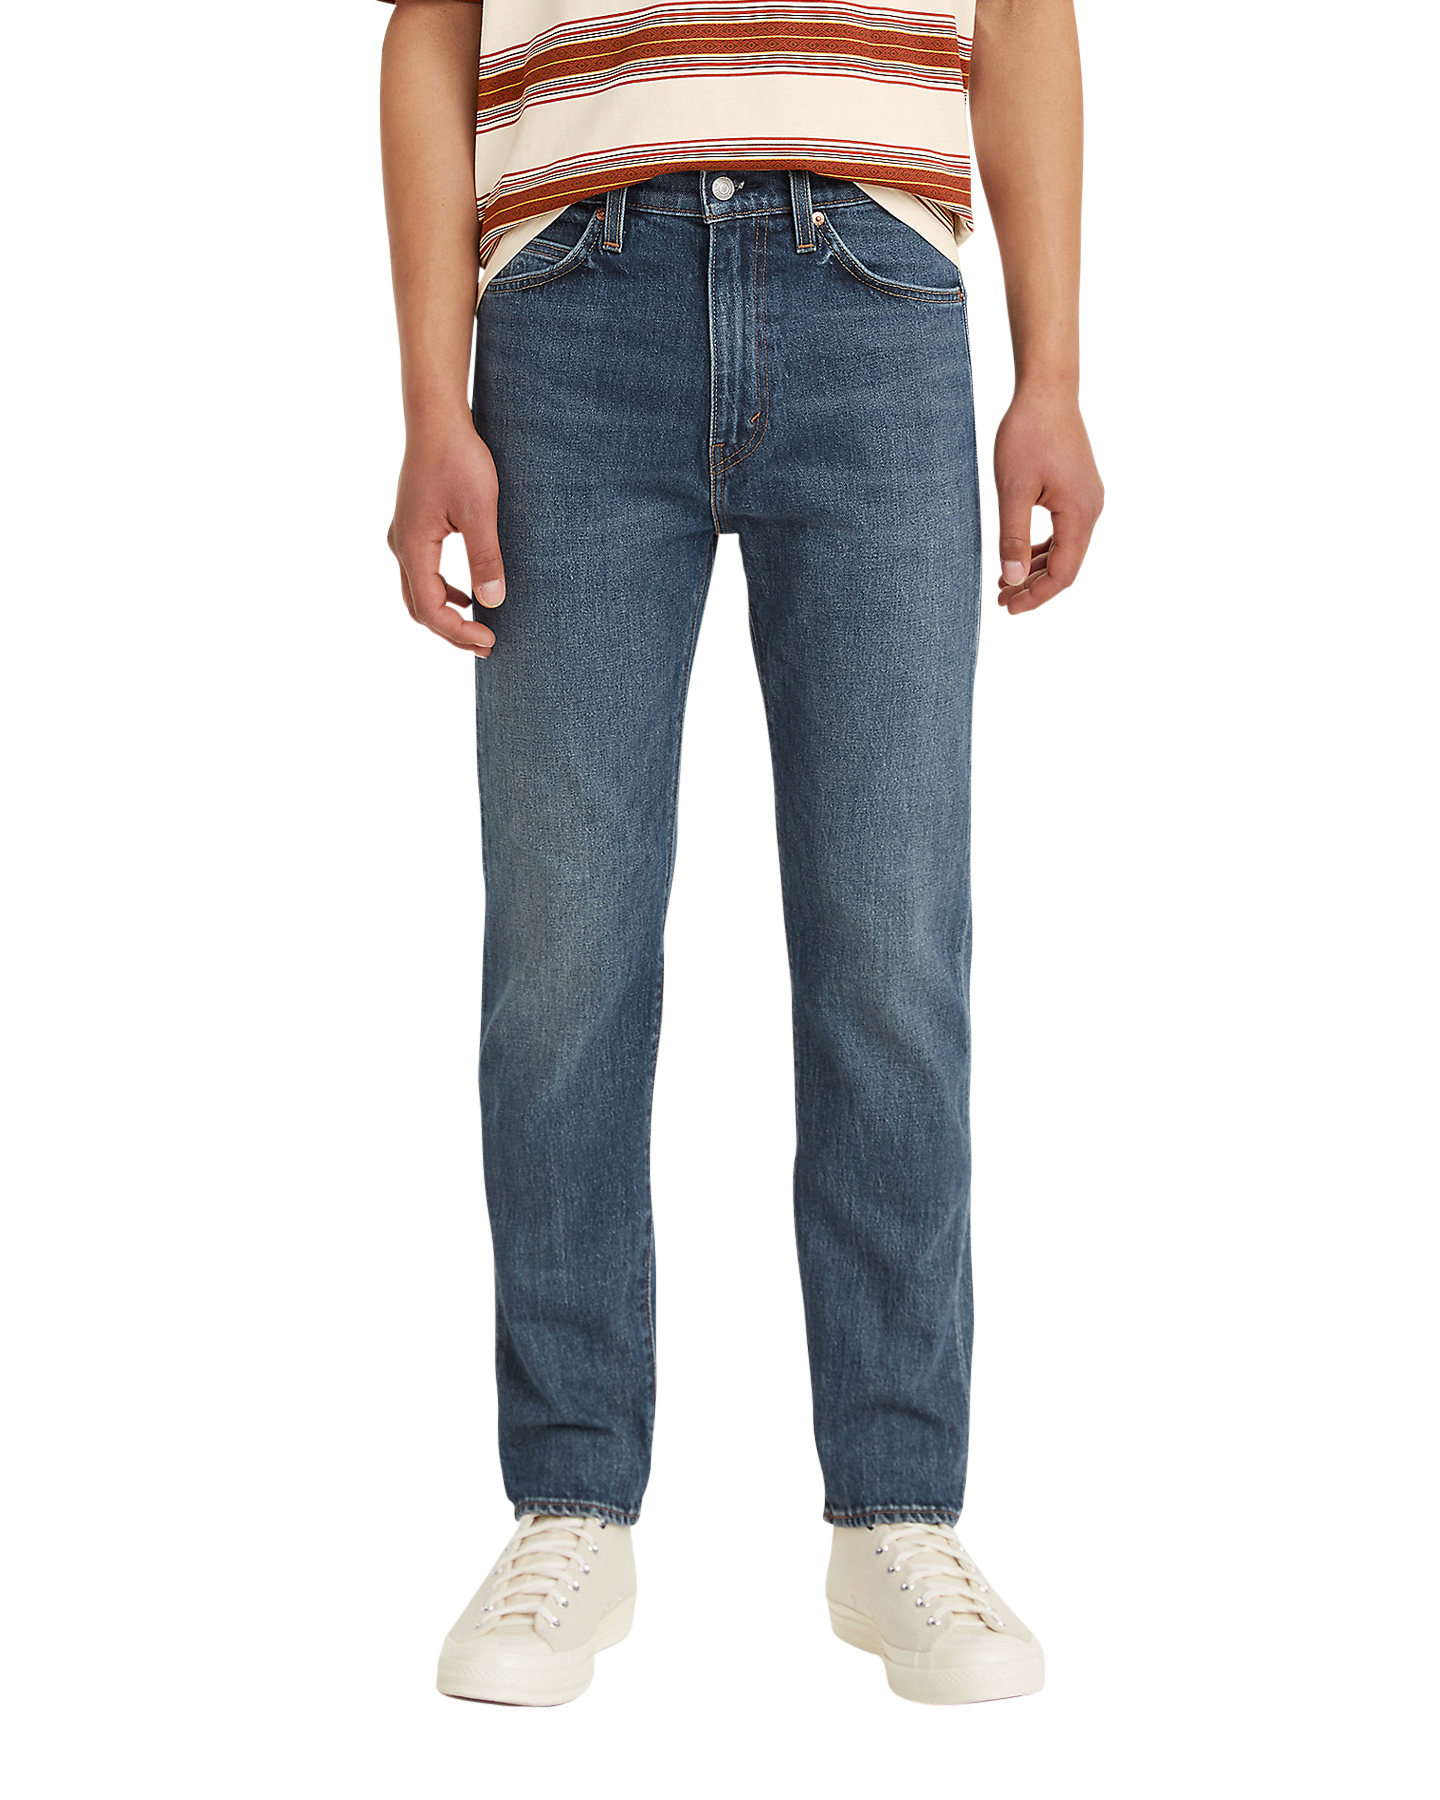 Levi's So High Slim Fit Jeans - Day In Cali | SurfStitch